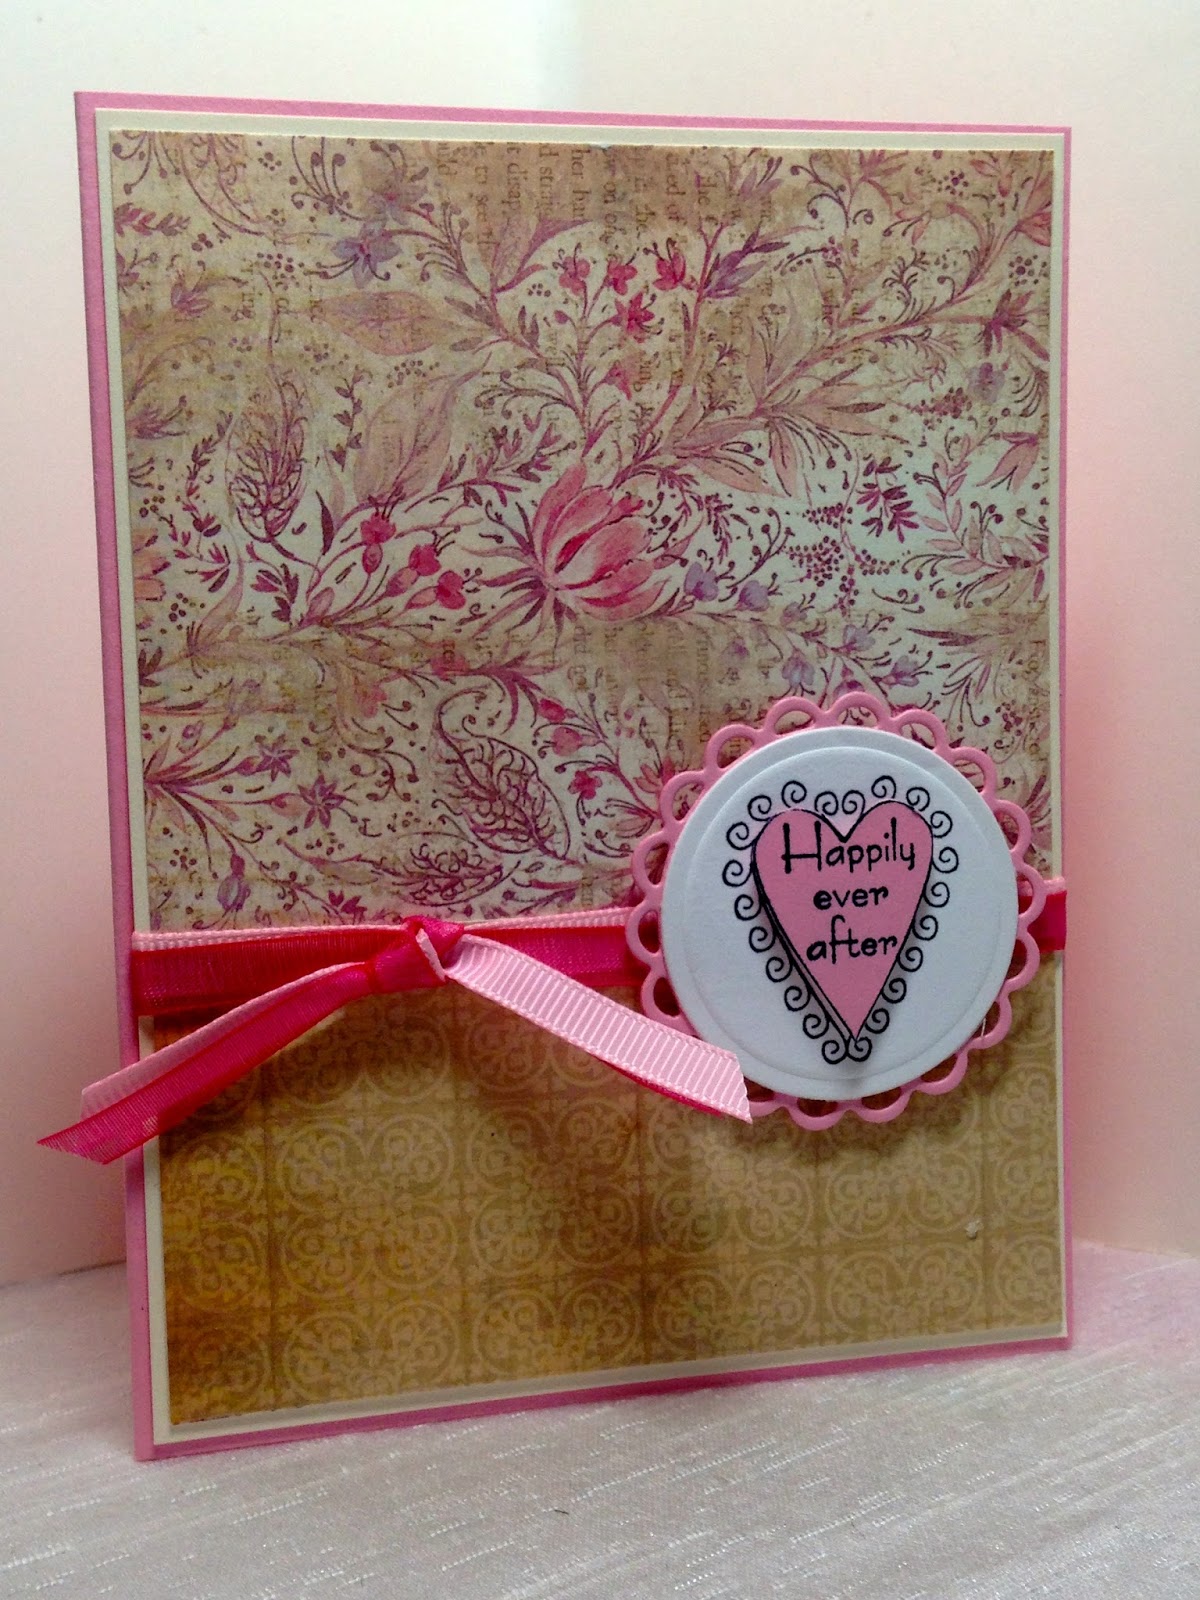 Amy's Creative Pursuits: Happily Ever After Card